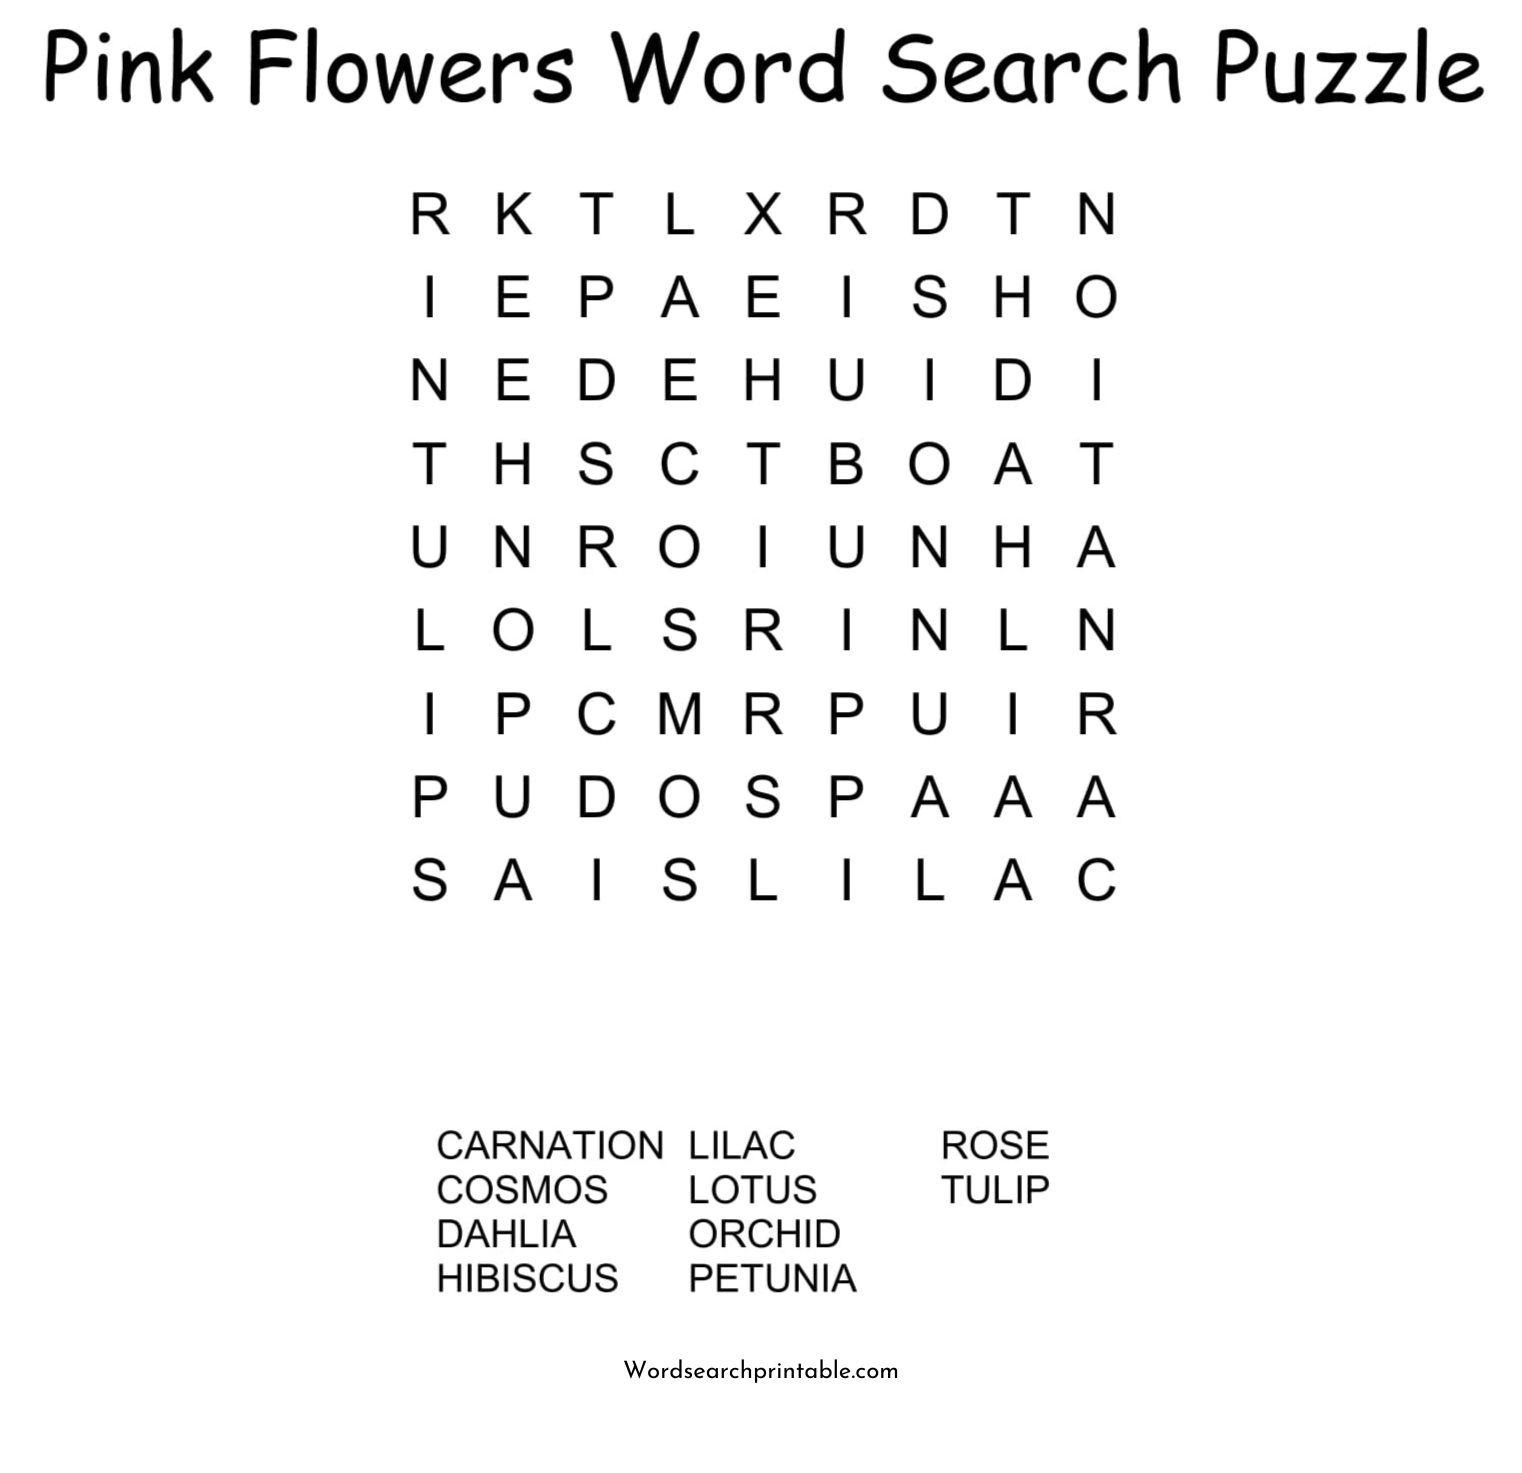 pink flowers word search puzzle